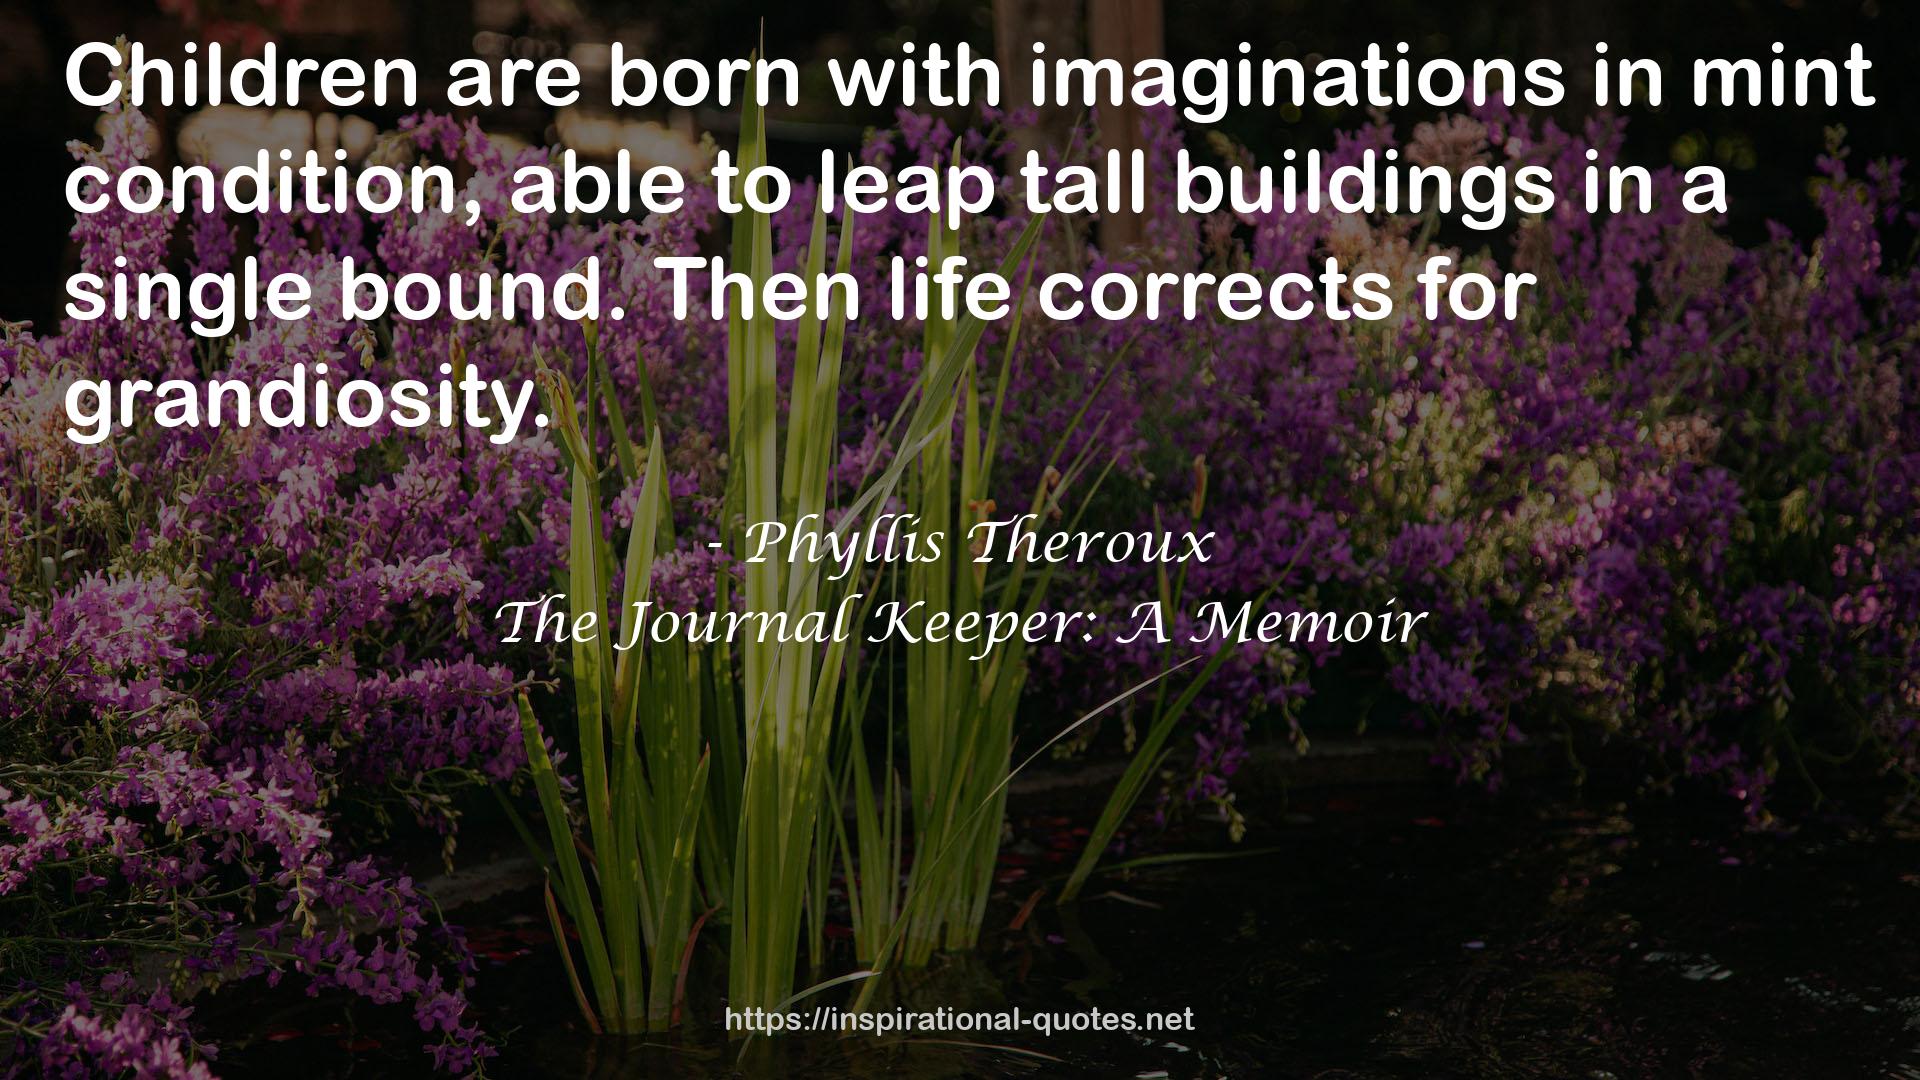 Phyllis Theroux QUOTES